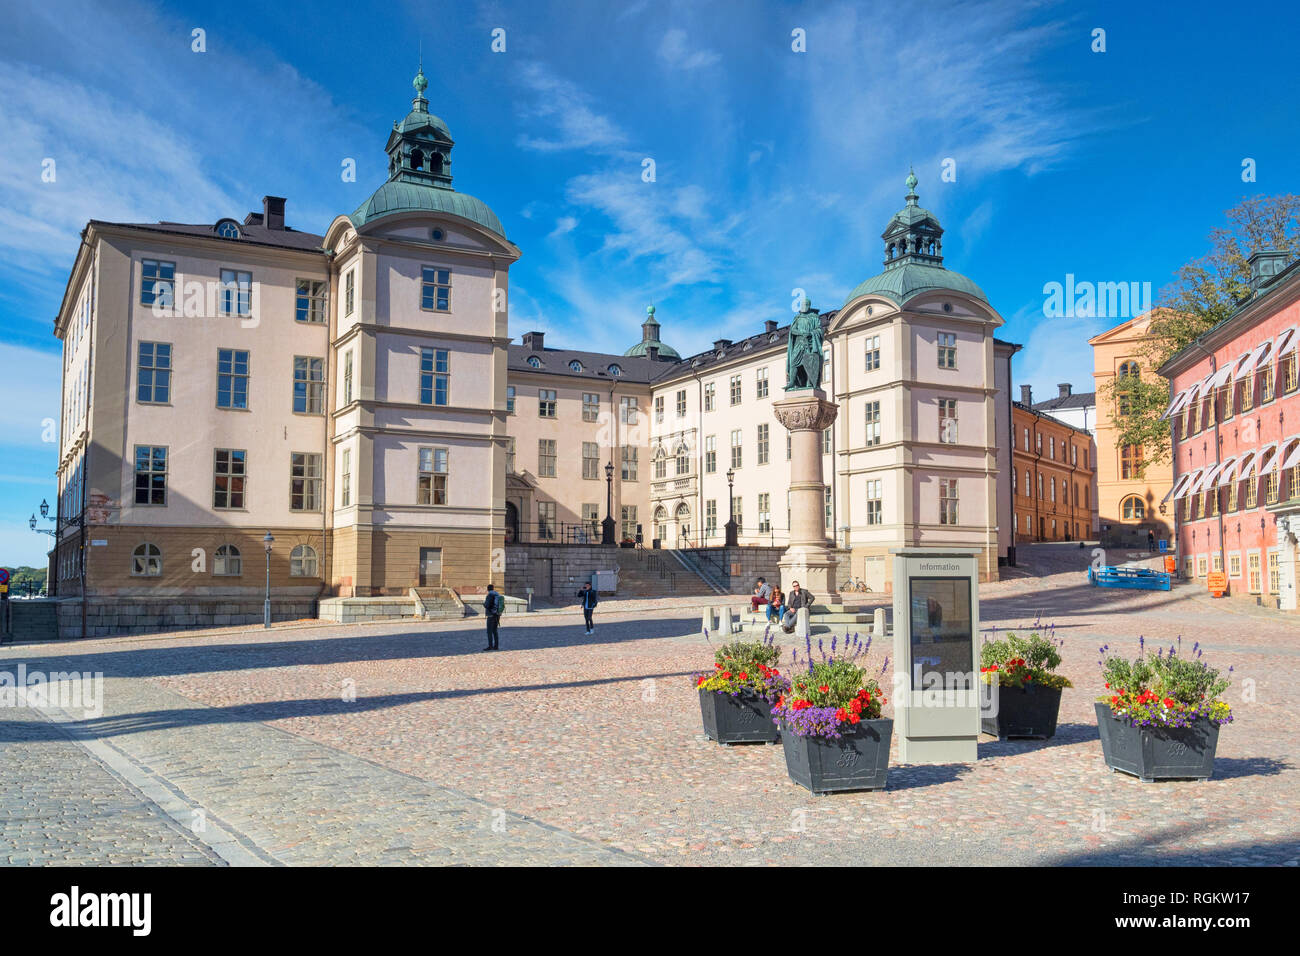 16 September 2018: Stockholm, Sweden - Palace of Wrangel, which houses the court of appeal,  island of Riddarholmen. The statue is of Birger Jarl... Stock Photo